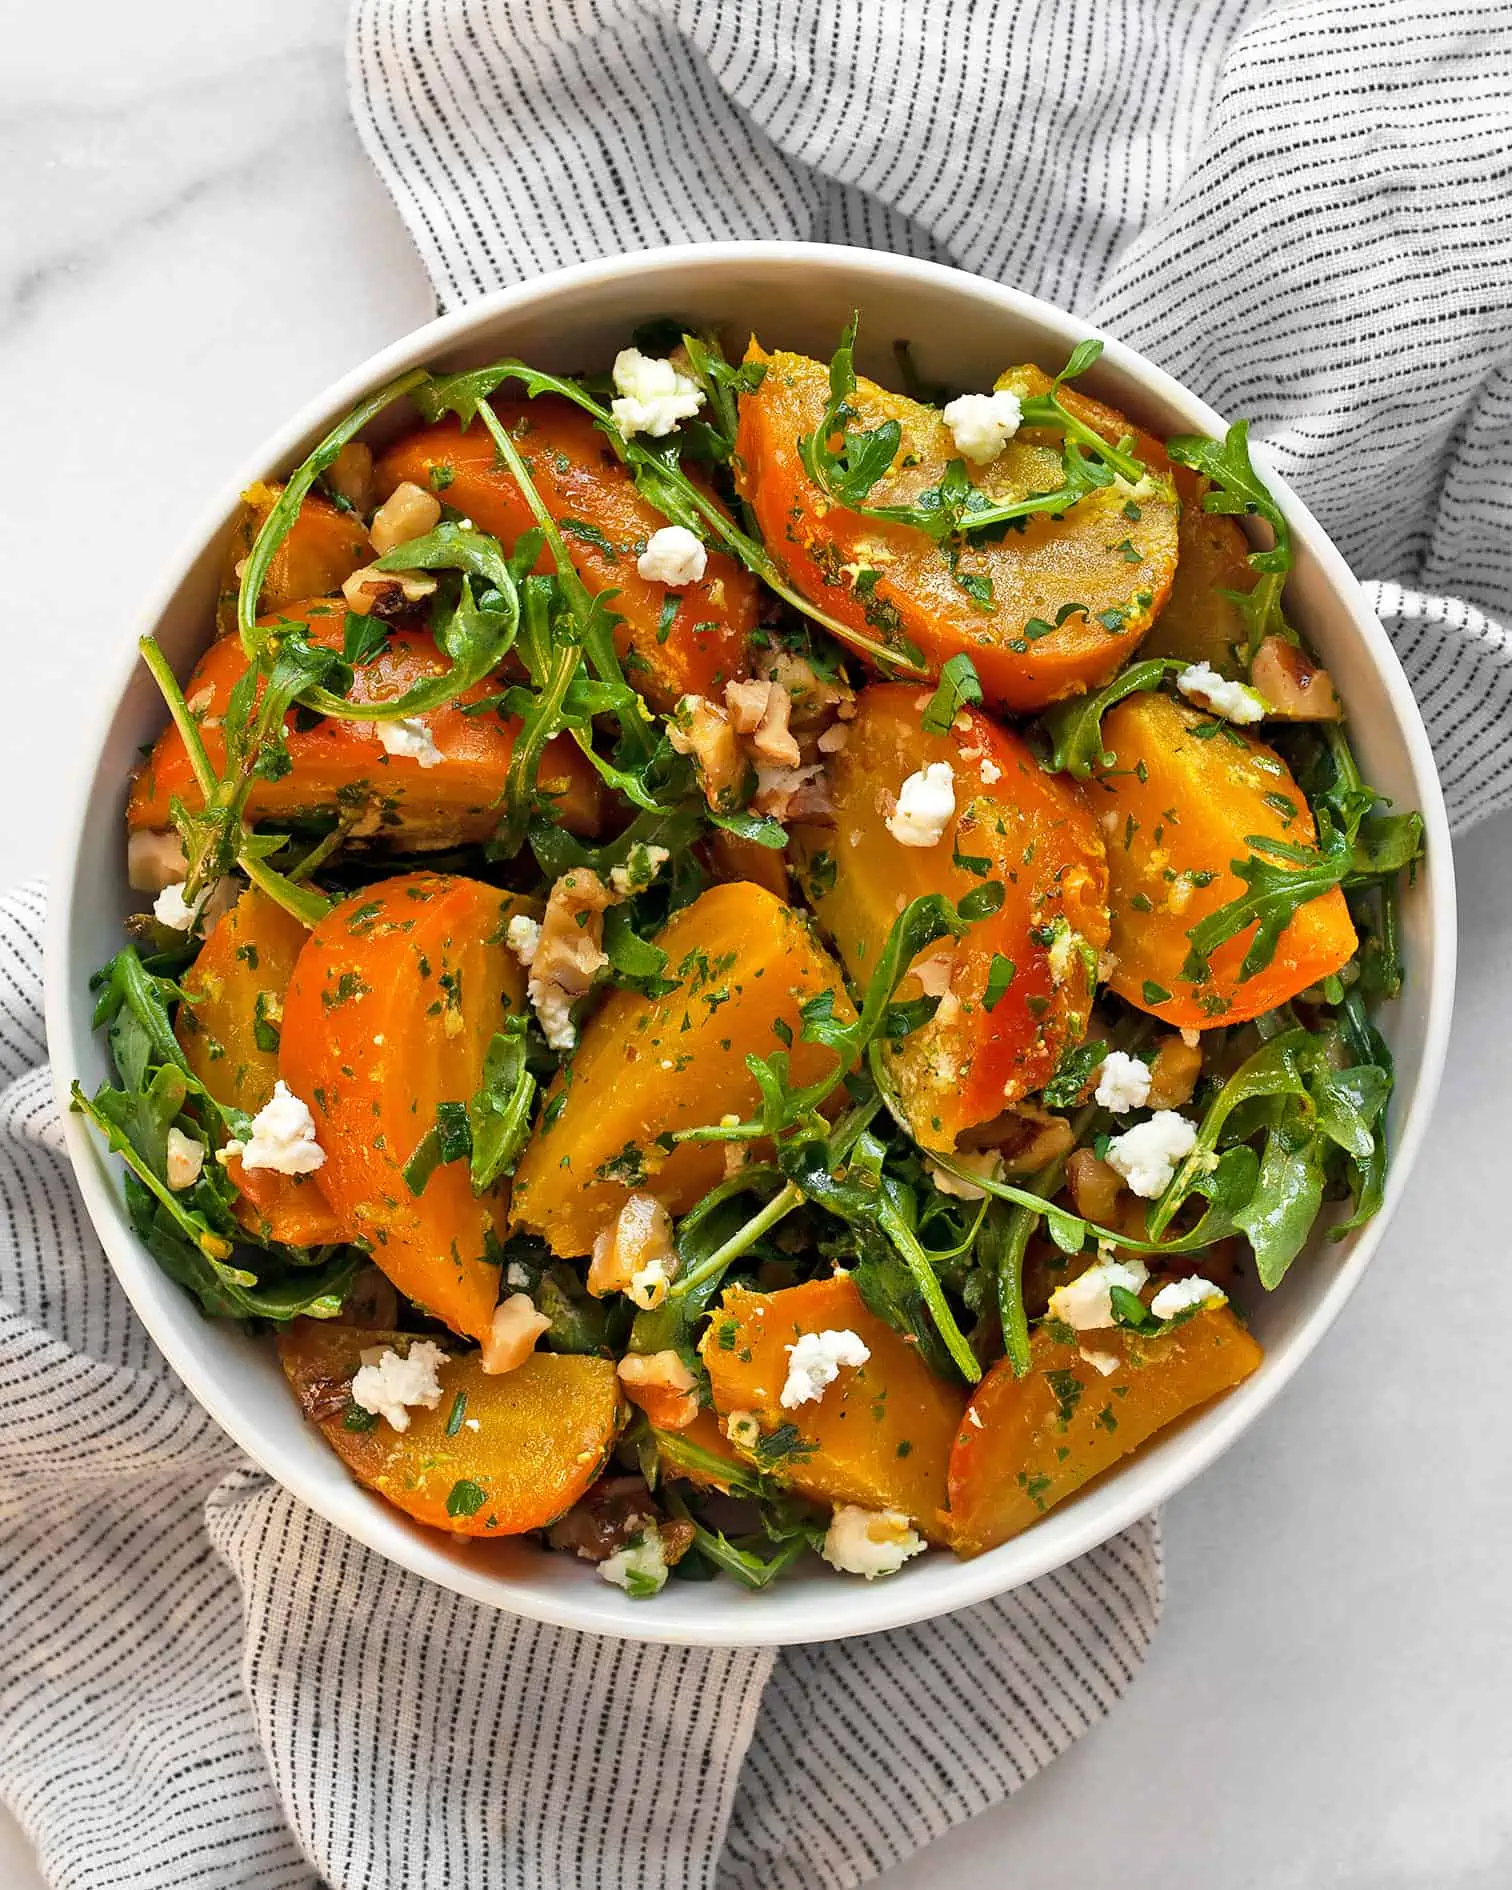 Roasted golden beet salad in a bowl.